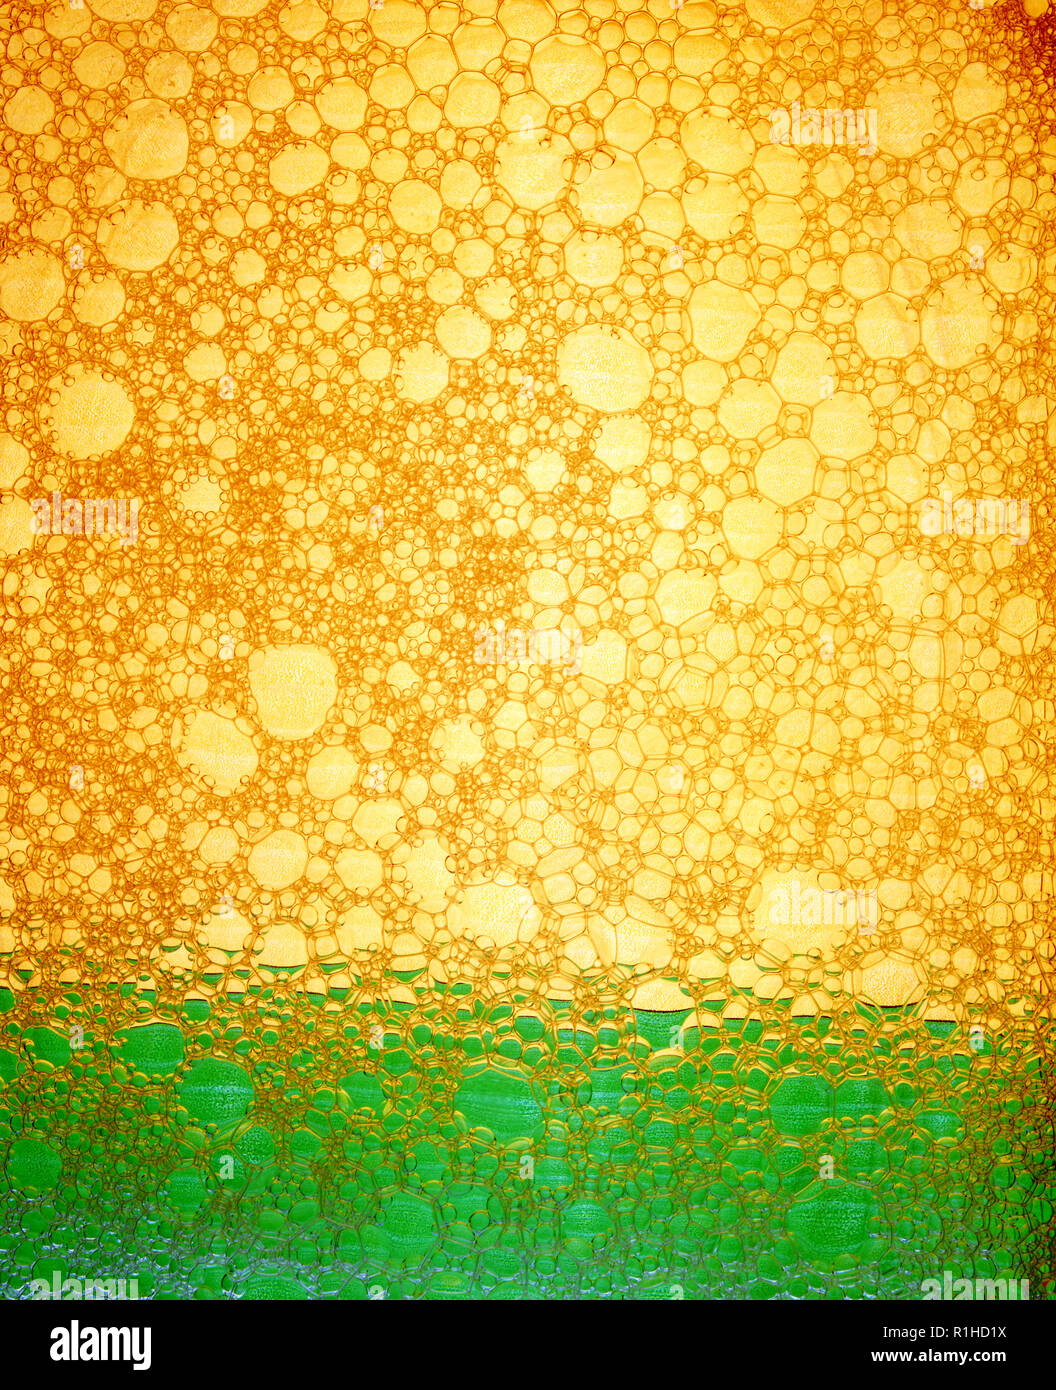 A brightly colored image of back lit bubbles. Stock Photo